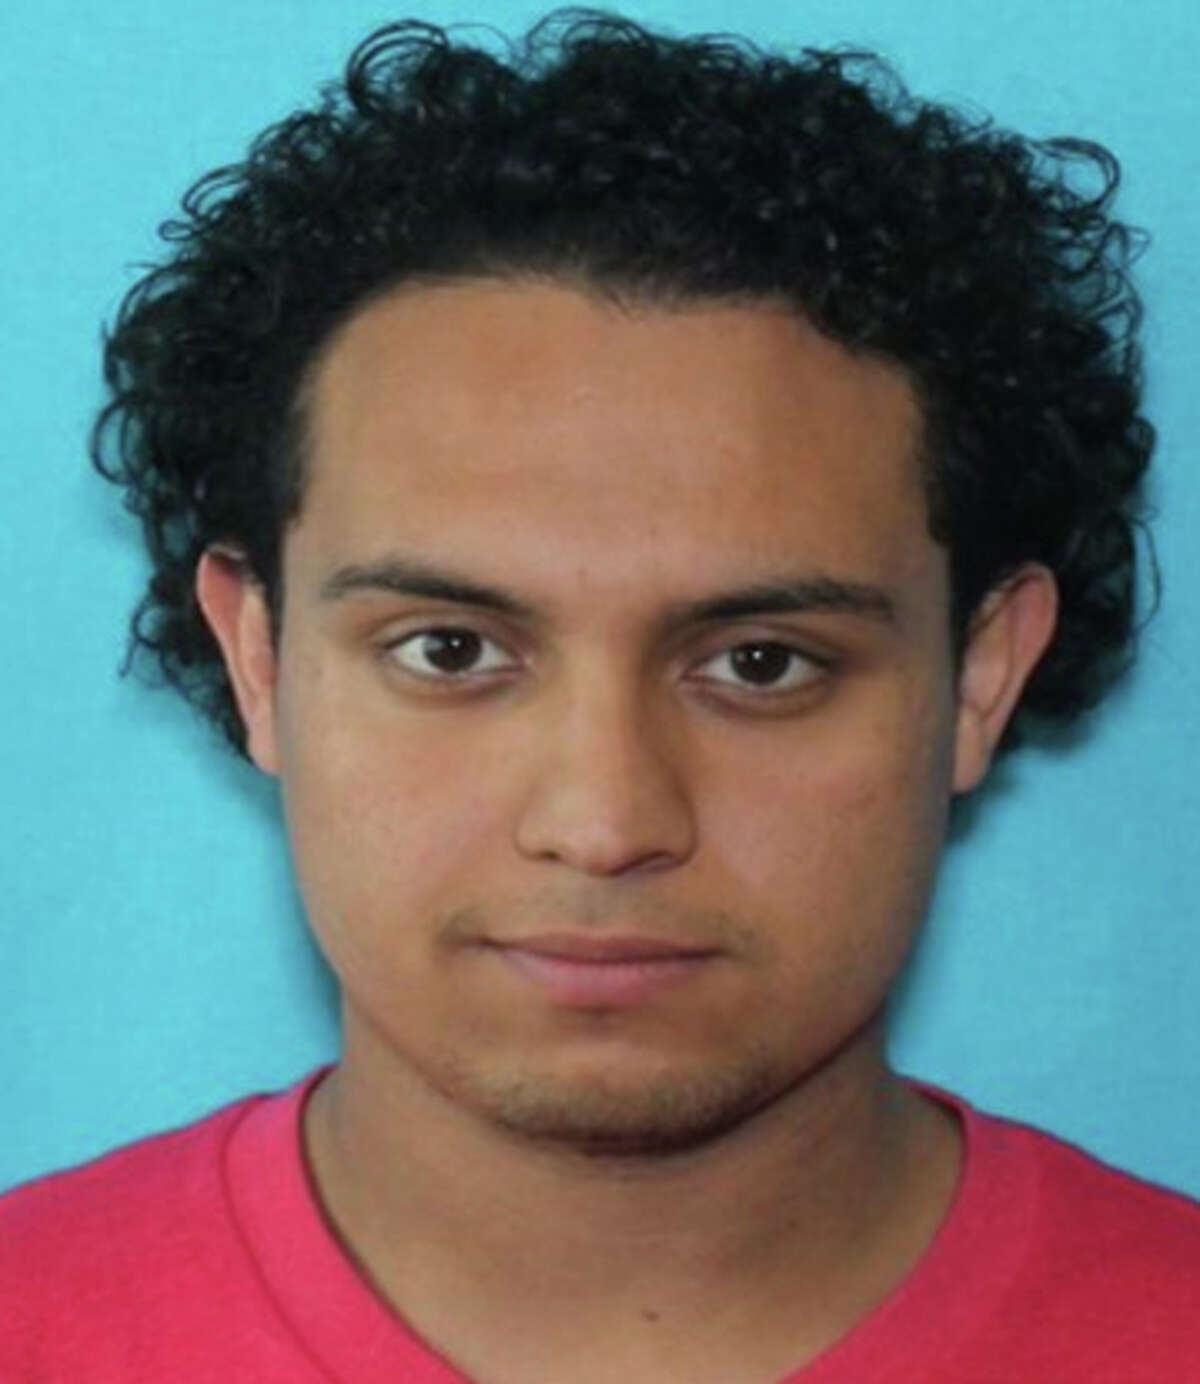 Christian Perez Alonzo was last seen at about 7 p.m. on Christmas Eve.